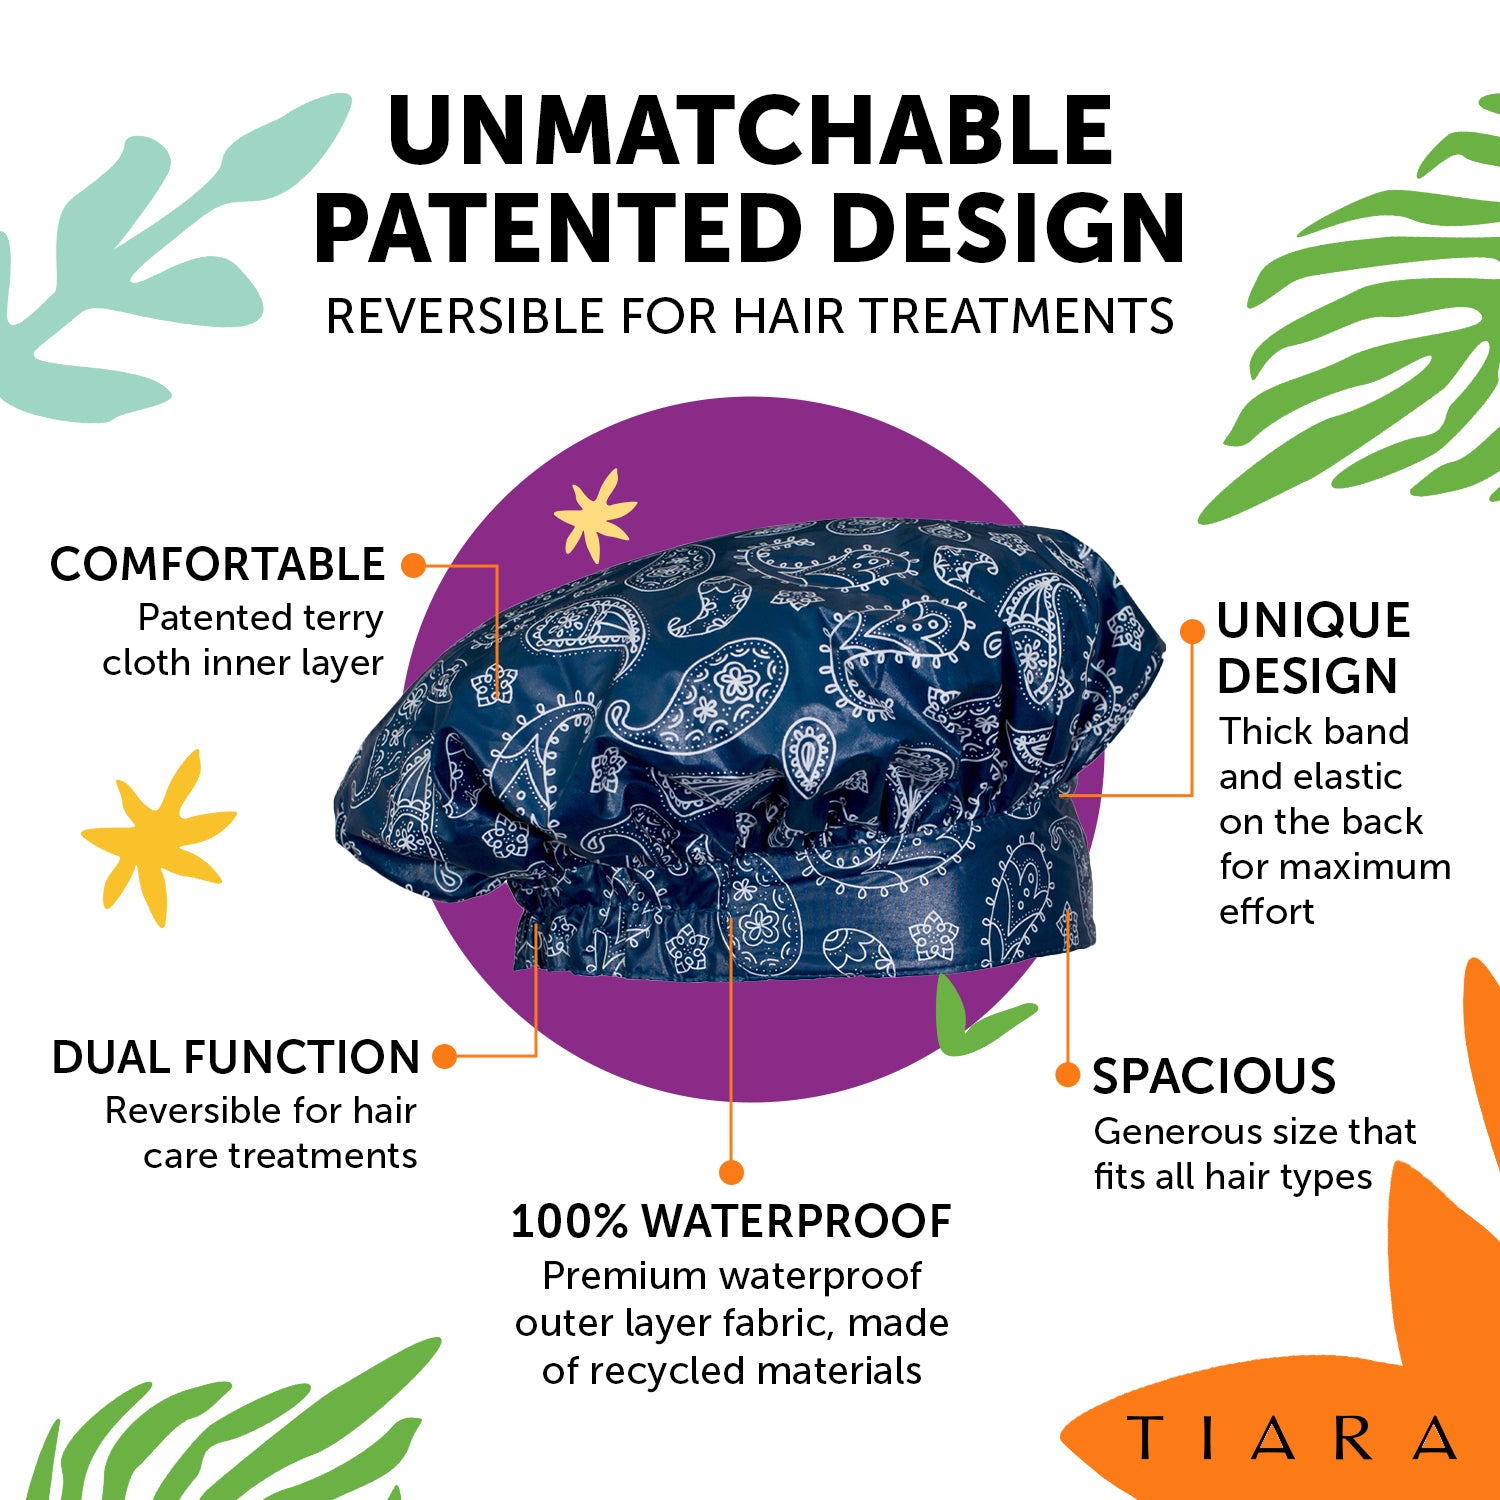 UNMATCHABLE PATENTED DESIGN. REVERSIBLE FOR HAIR TREATMENTS. TIARA SHOWER CAP PAISLEY DESIGN EXPLANATION: COMFORTABLE: PATENTED TERRY CLOTH INNER LAYER. UNIQUE DESIGN : THICK BAND AND ELASTIC ON THE BACK FOR MAXIMUM COMFORT. SPACIOUS: GENEROUS SIZE THAT FITS ALL HAIR TYPES 100% WATERPROOF. 